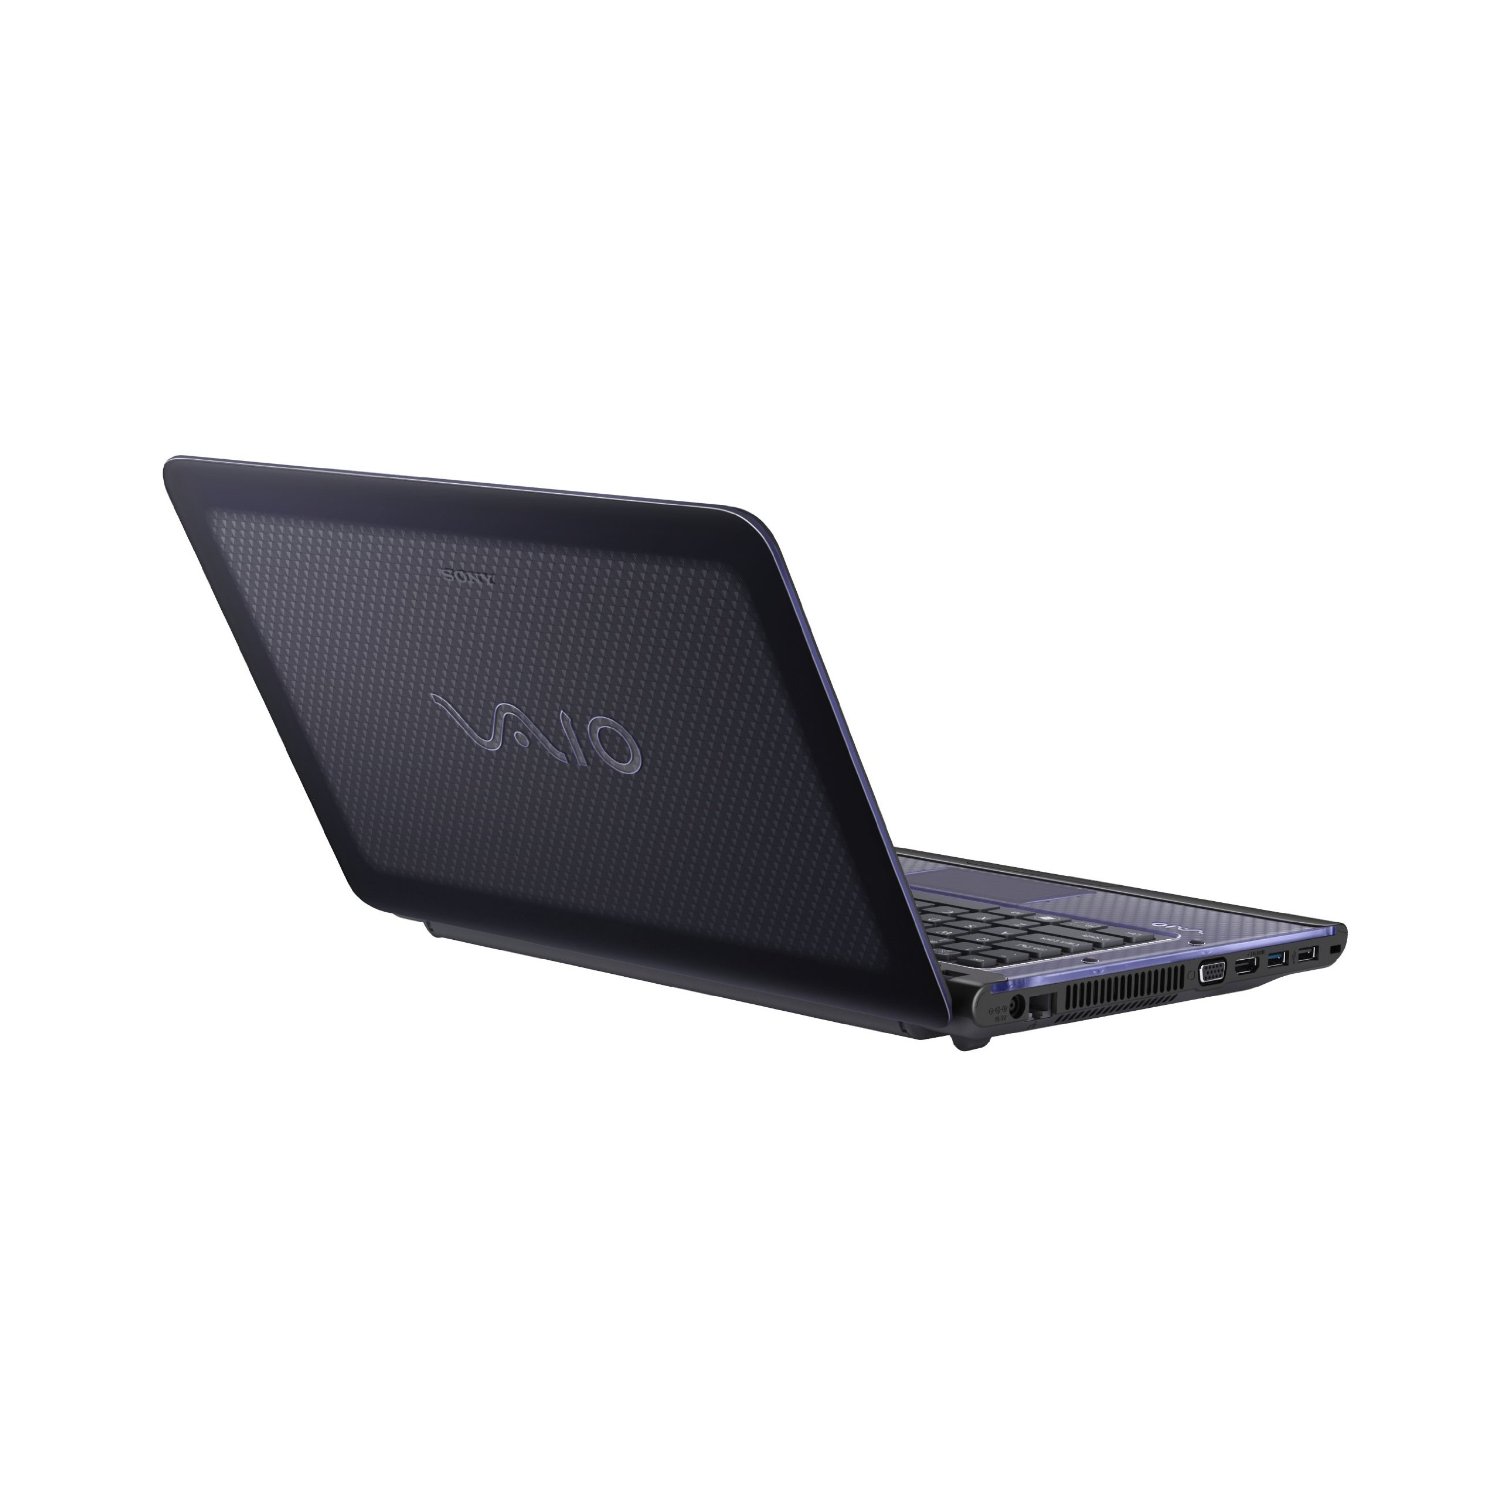 http://thetechjournal.com/wp-content/uploads/images/1202/1329821105-sony-vaio-vpcca22fxb-14inch-laptop-4.jpg